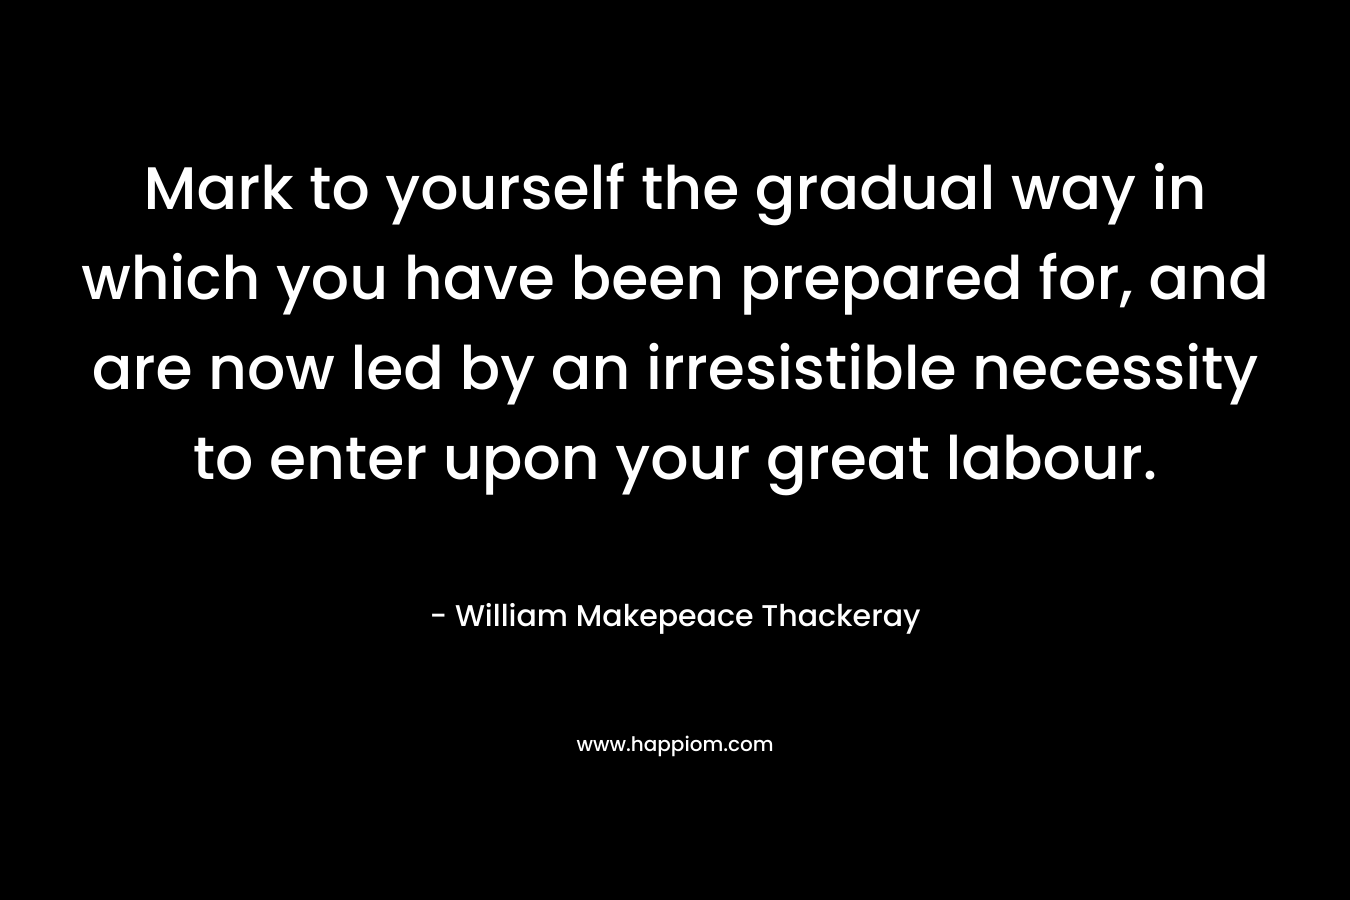 Mark to yourself the gradual way in which you have been prepared for, and are now led by an irresistible necessity to enter upon your great labour. – William Makepeace Thackeray